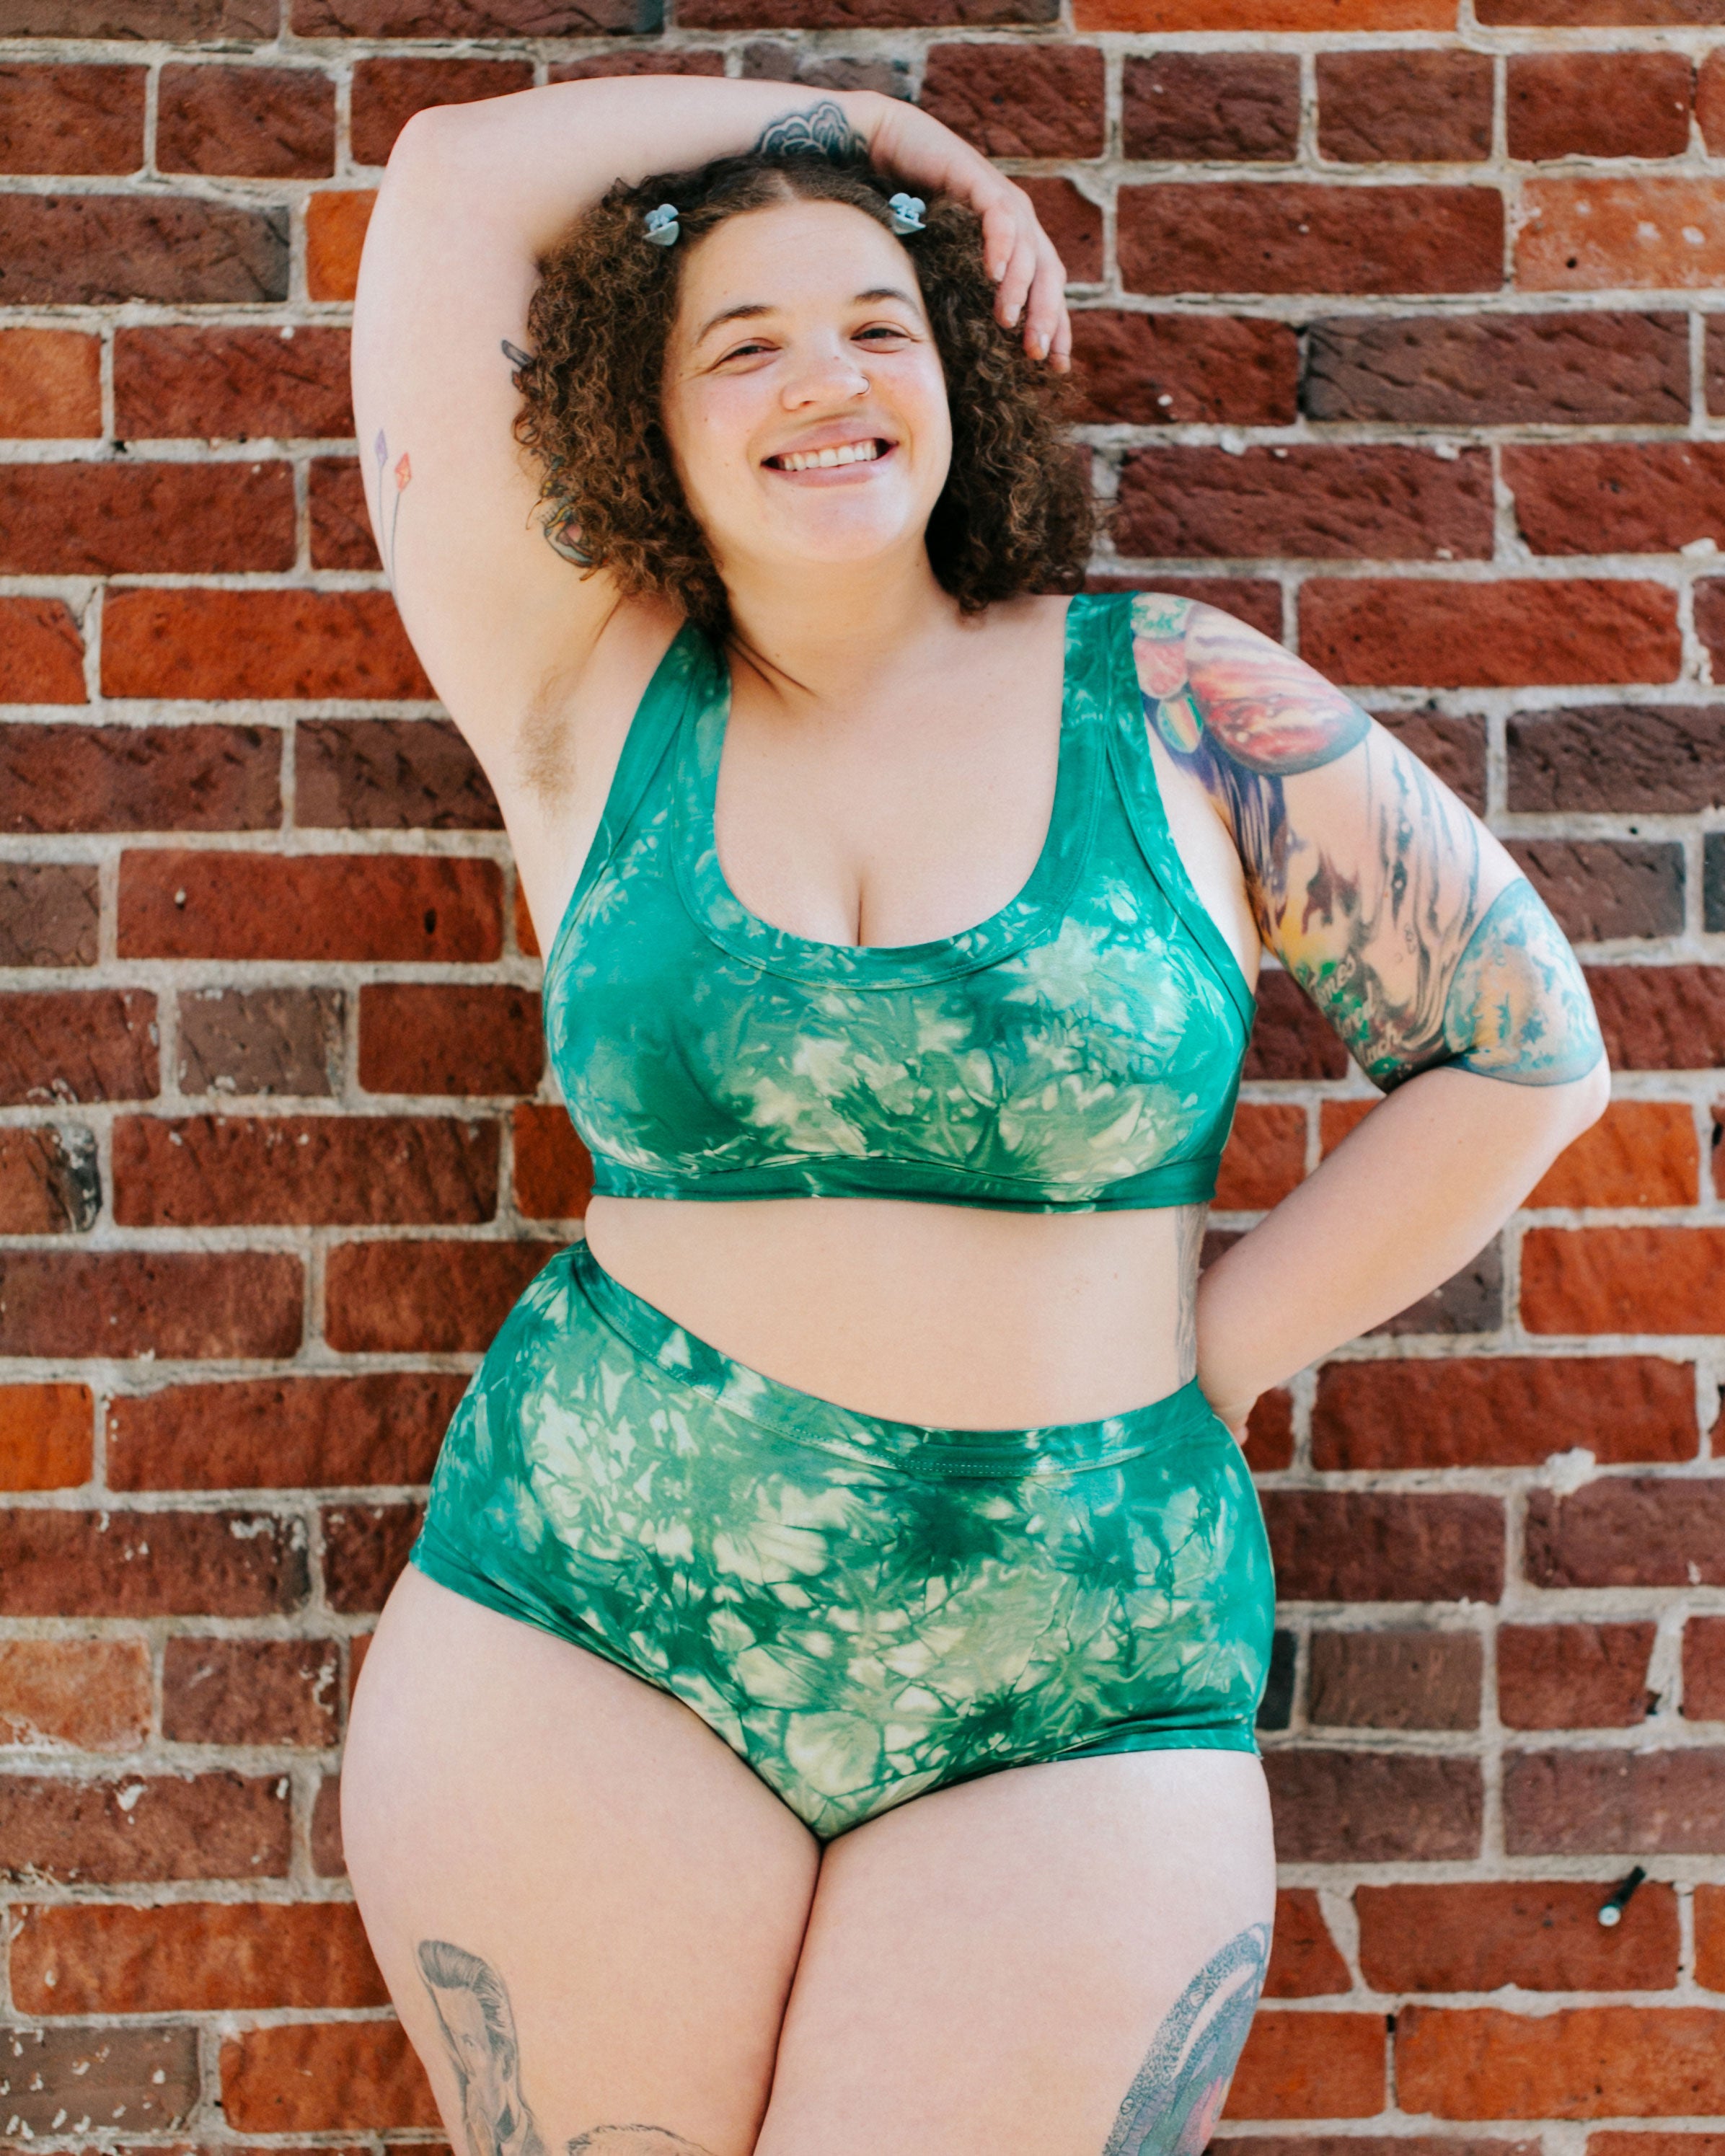 Model smiling wearing Thunderpants organic cotton Original style underwear and Bralette in Clover Green scrunch dye.